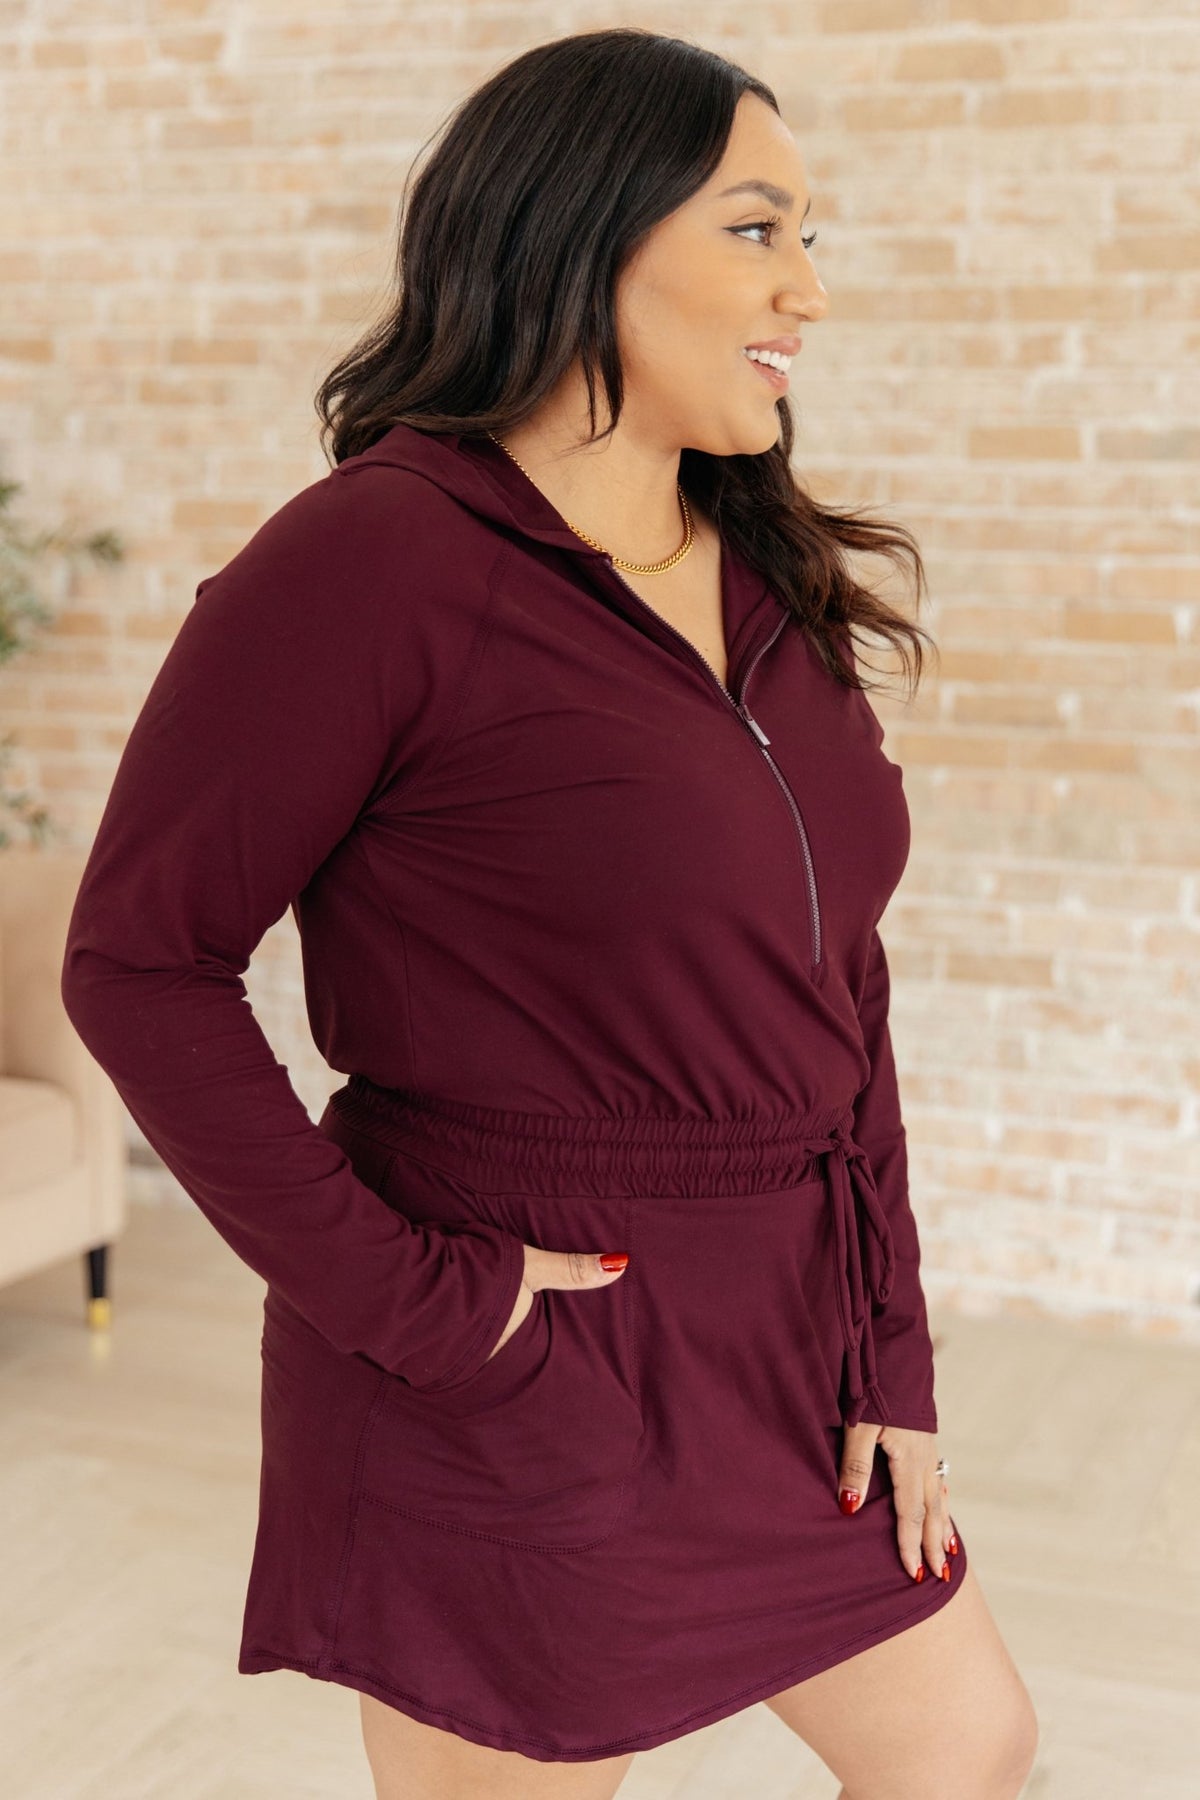 Getting Out Long Sleeve Hoodie Romper in Maroon - Happily Ever Atchison Shop Co.